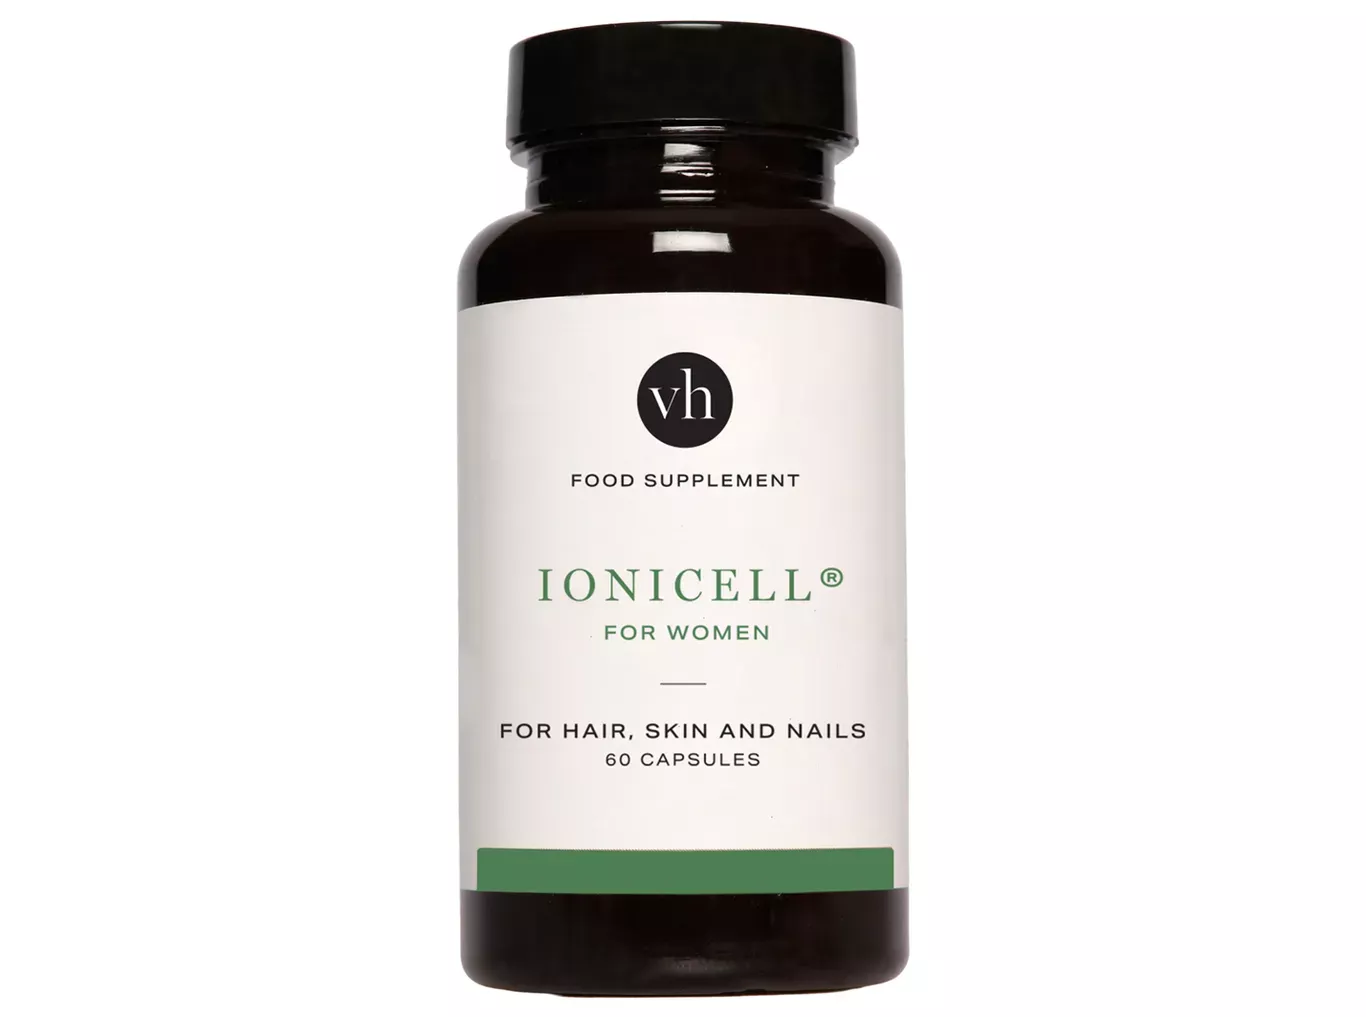 Ionicell for Women